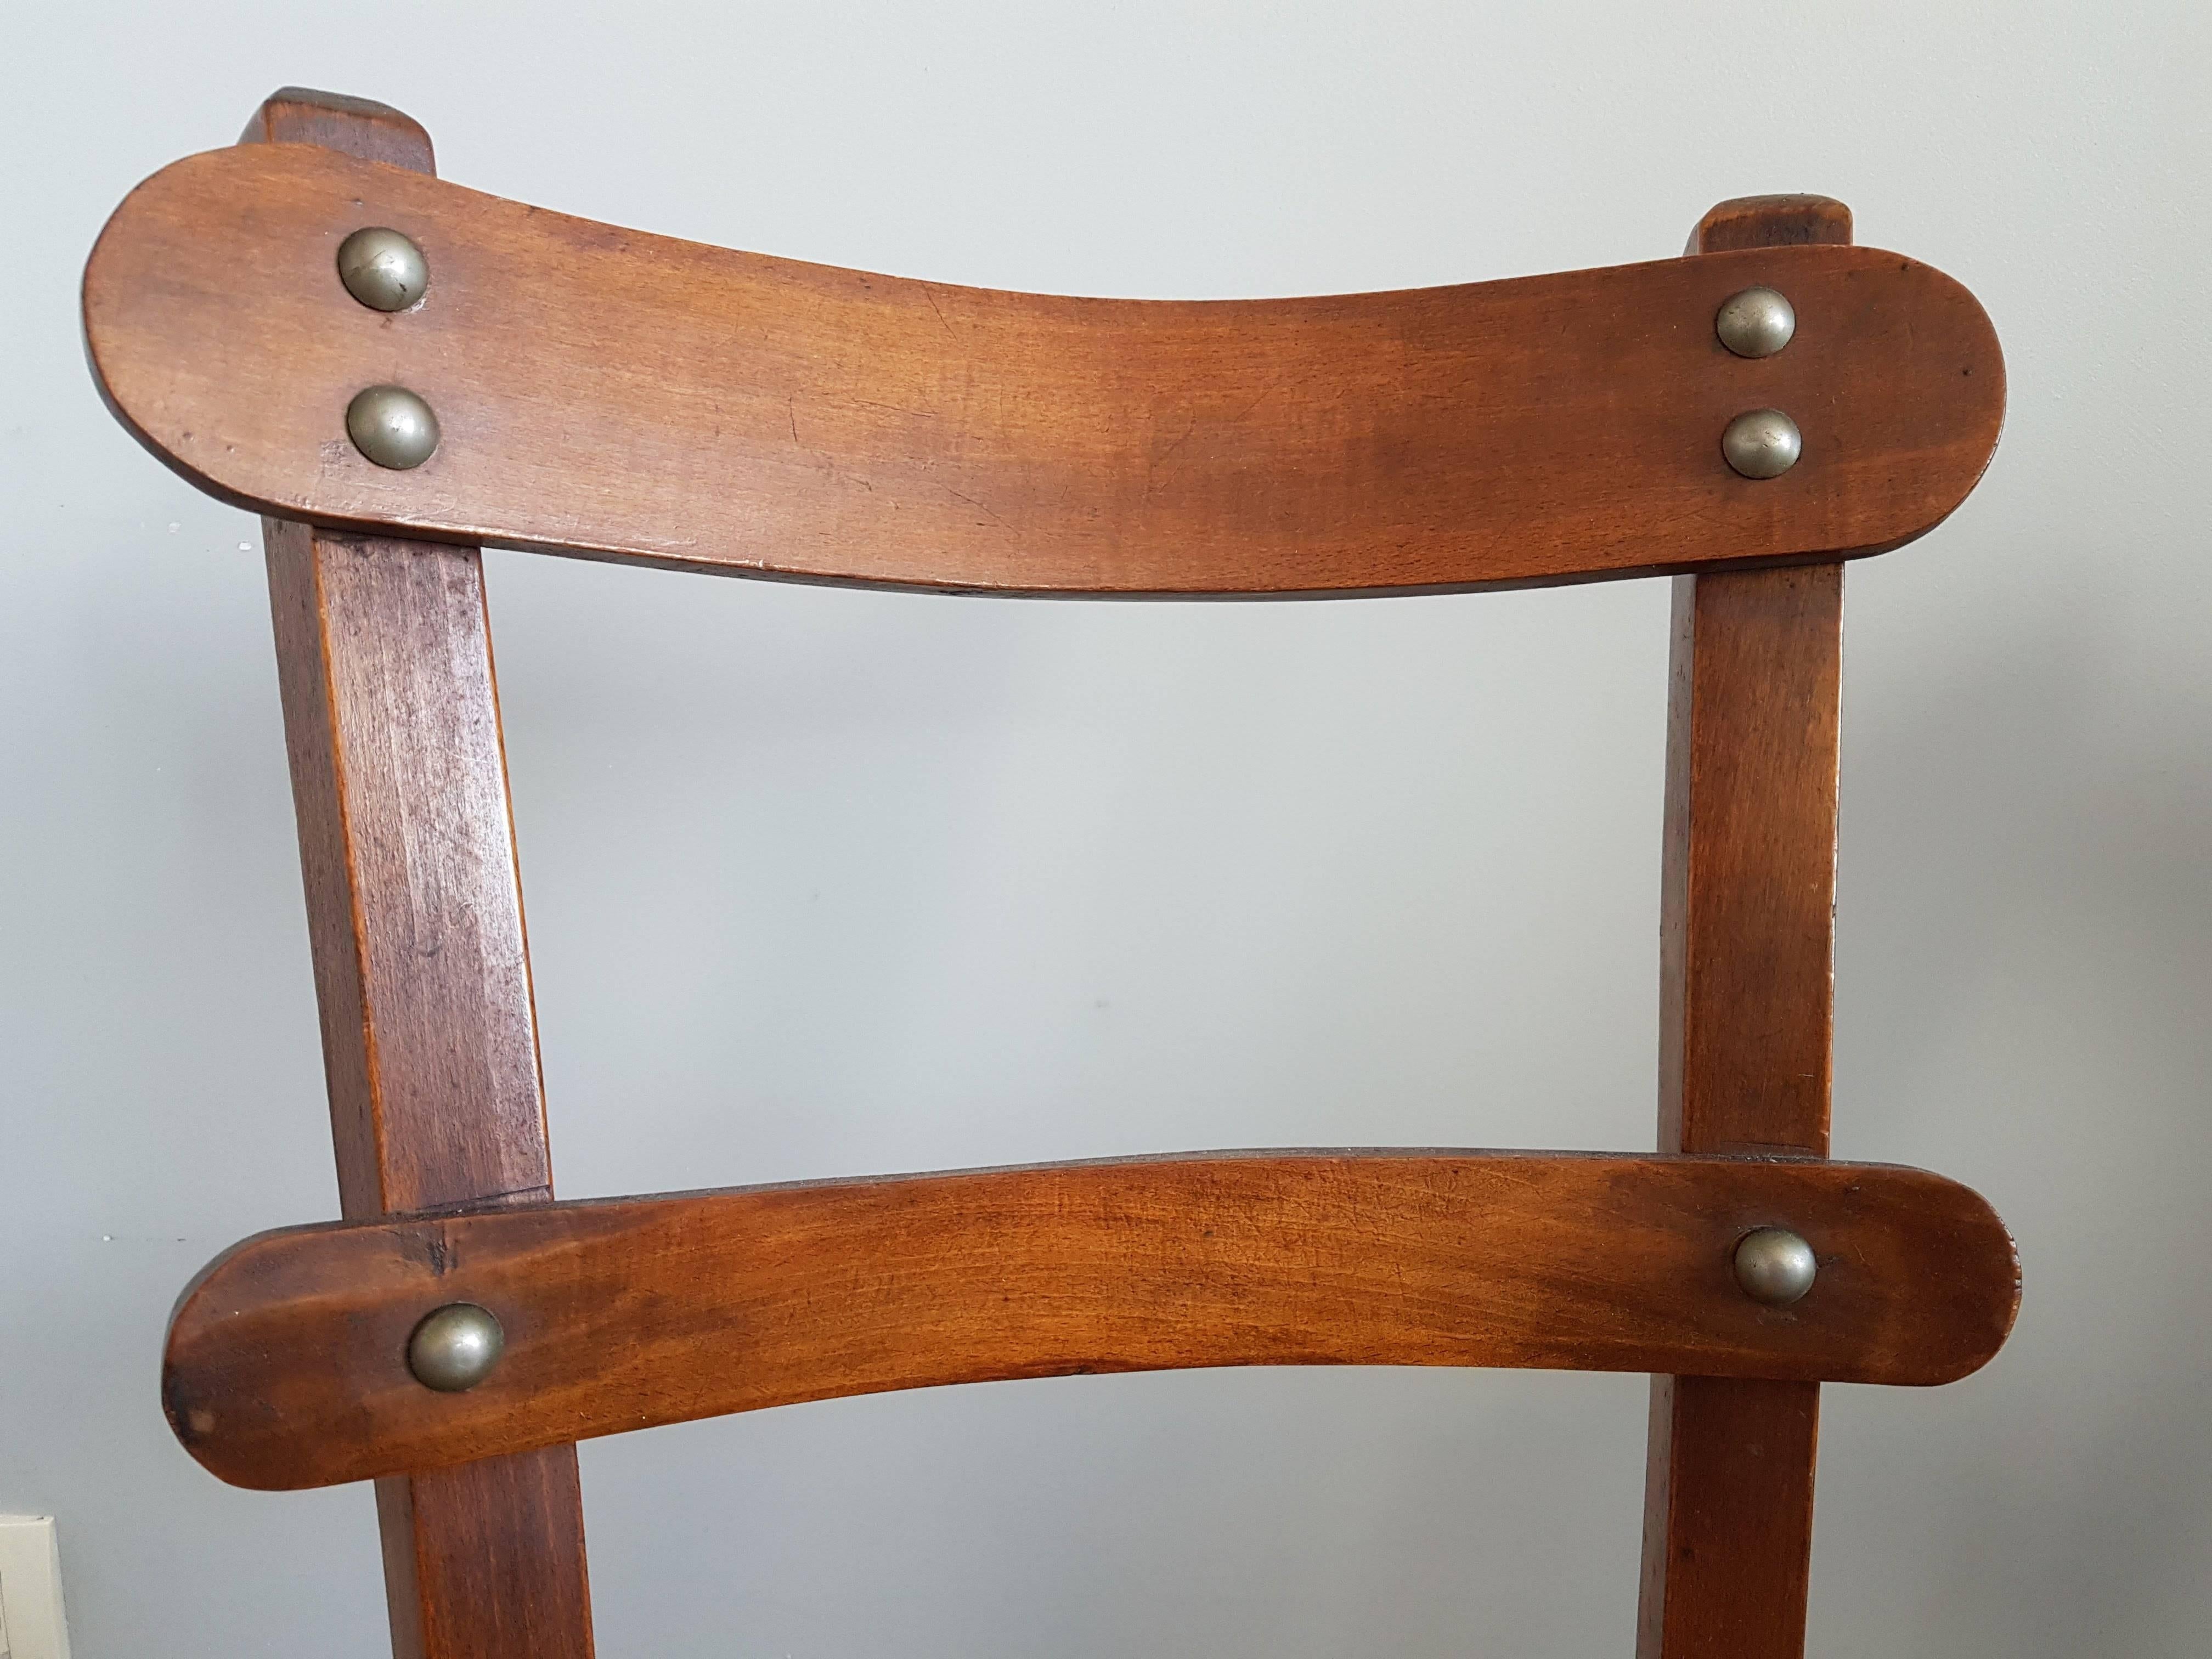 Charming pair of French Provincial caned chairs.
Rare style and in a very good condition.